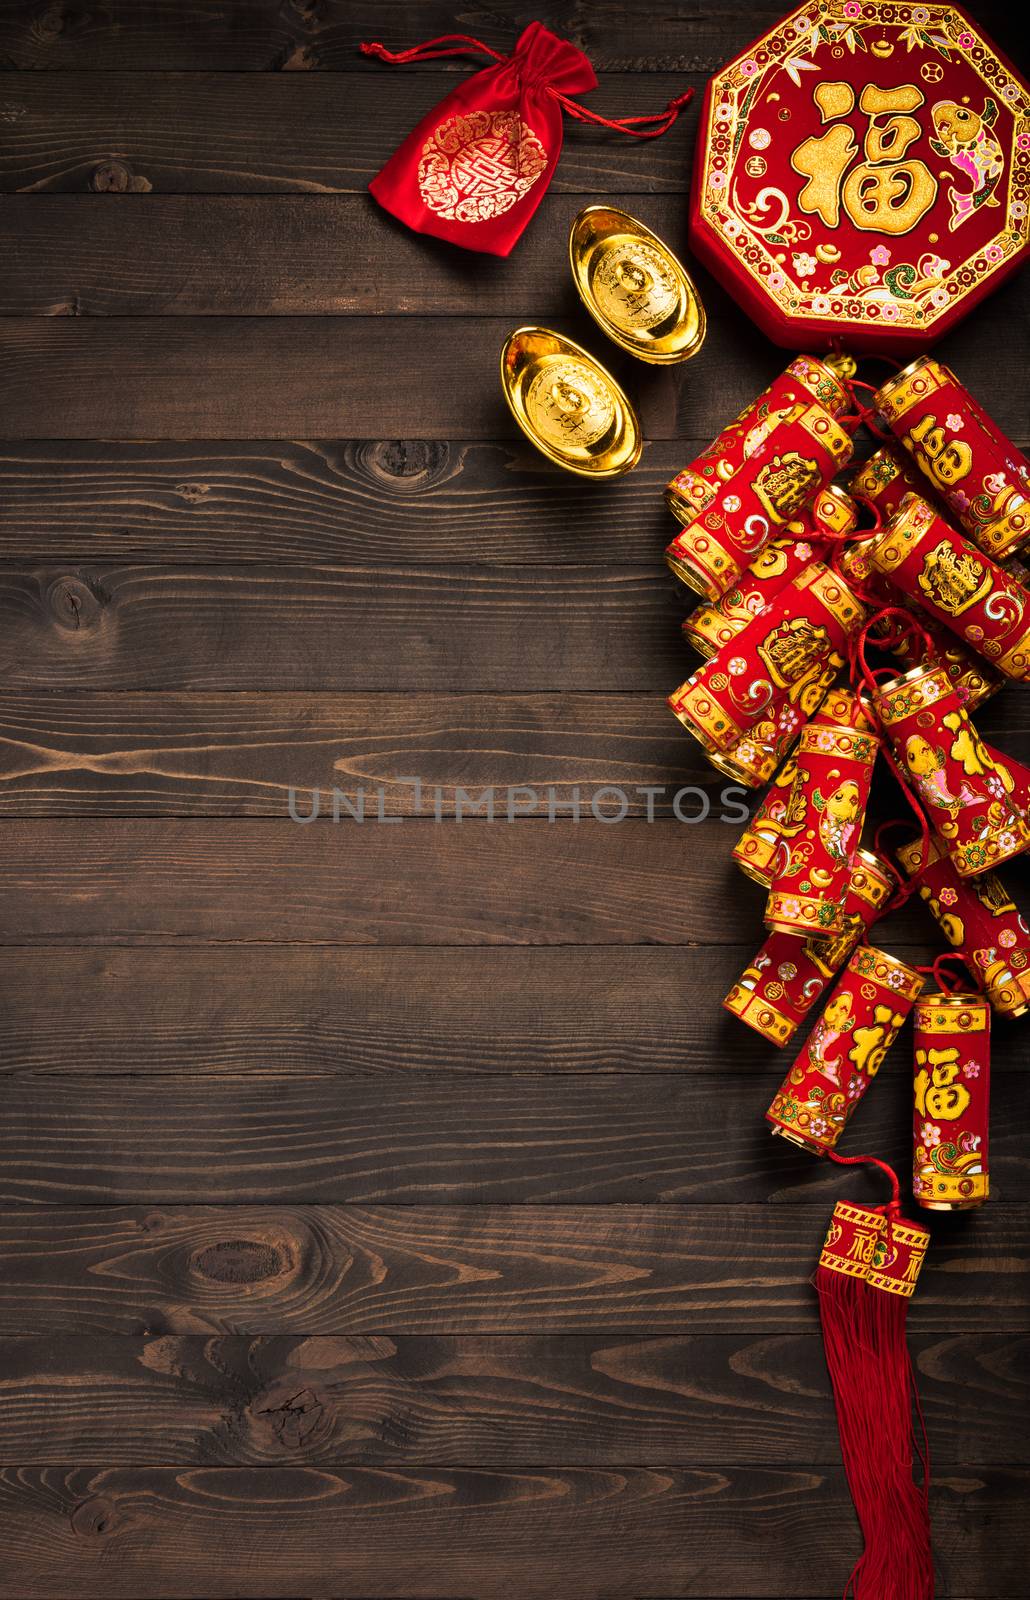 Chinese new year 2021 festival, Top view flat lay lunar new year or Happy Chinese new year decorations celebration with copy space on the wood background (Chinese character "fu" meaning fortune)